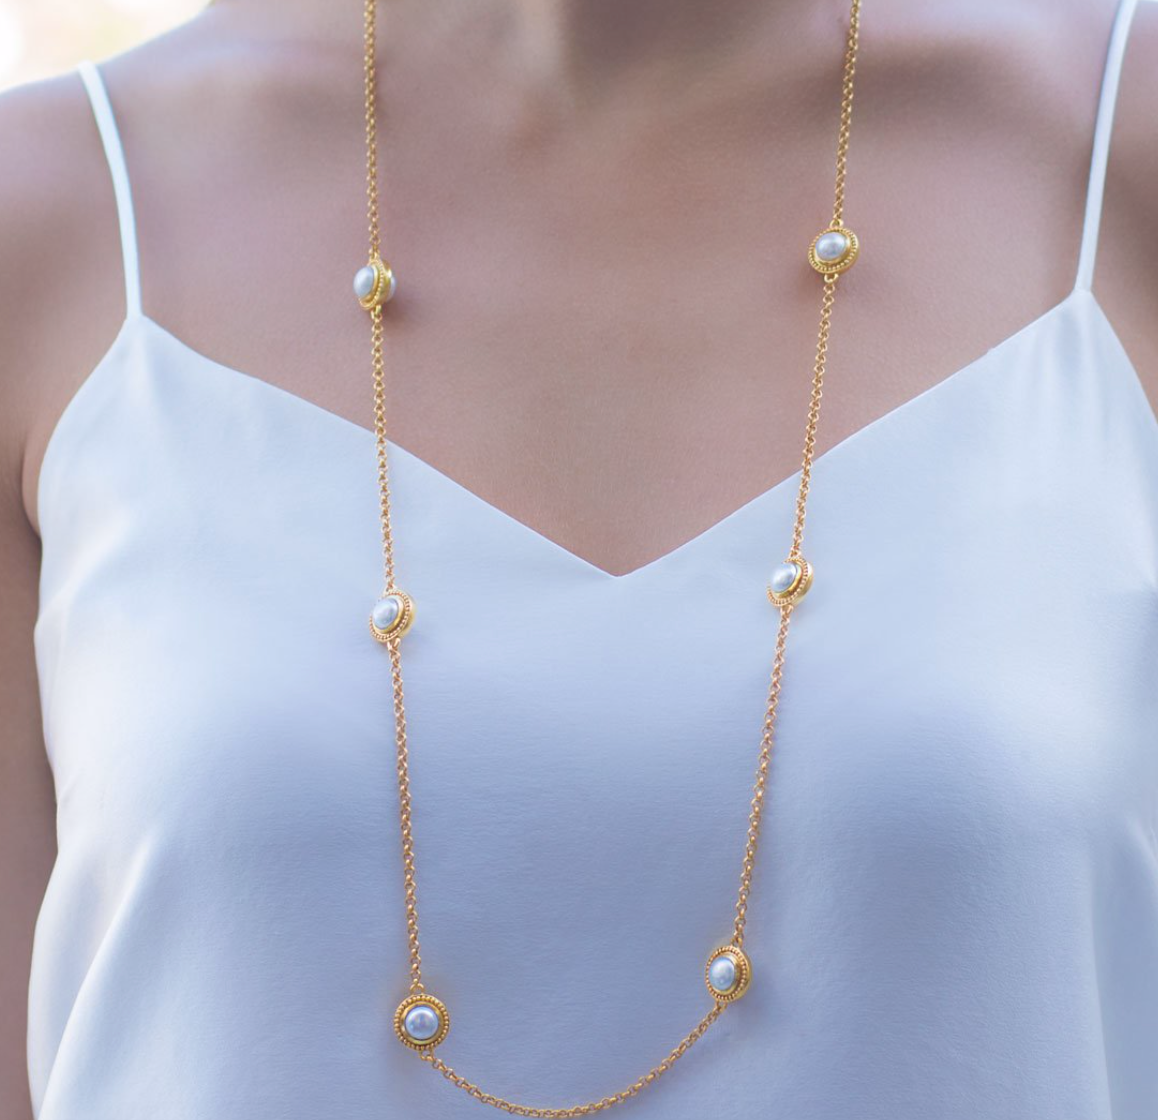 Loire Pearl Station Necklace